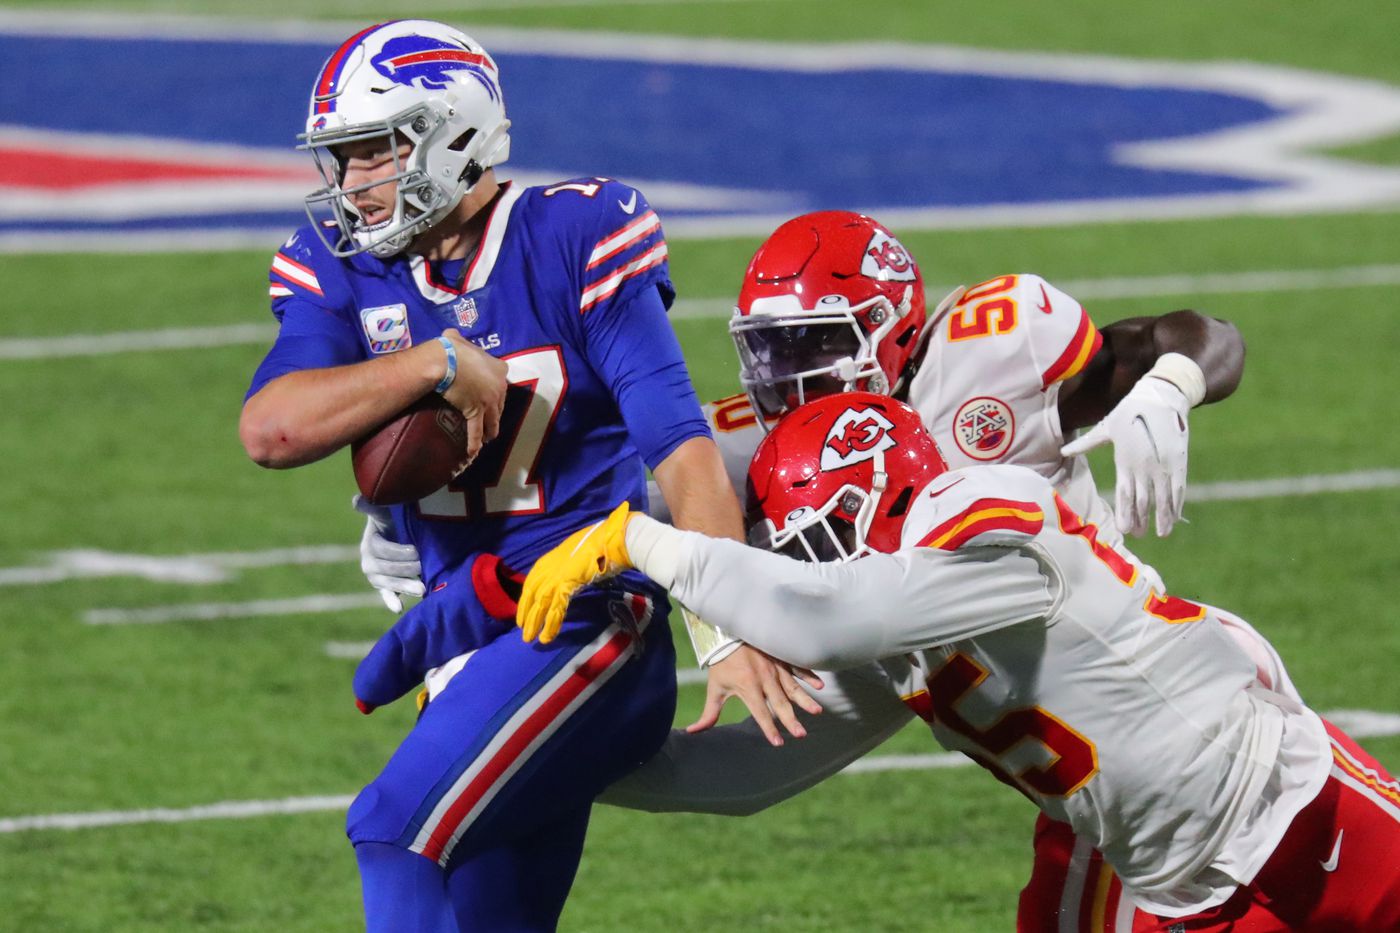 NFL playoff schedule: Bills vs. Chiefs highlights divisional round games -  Pats Pulpit